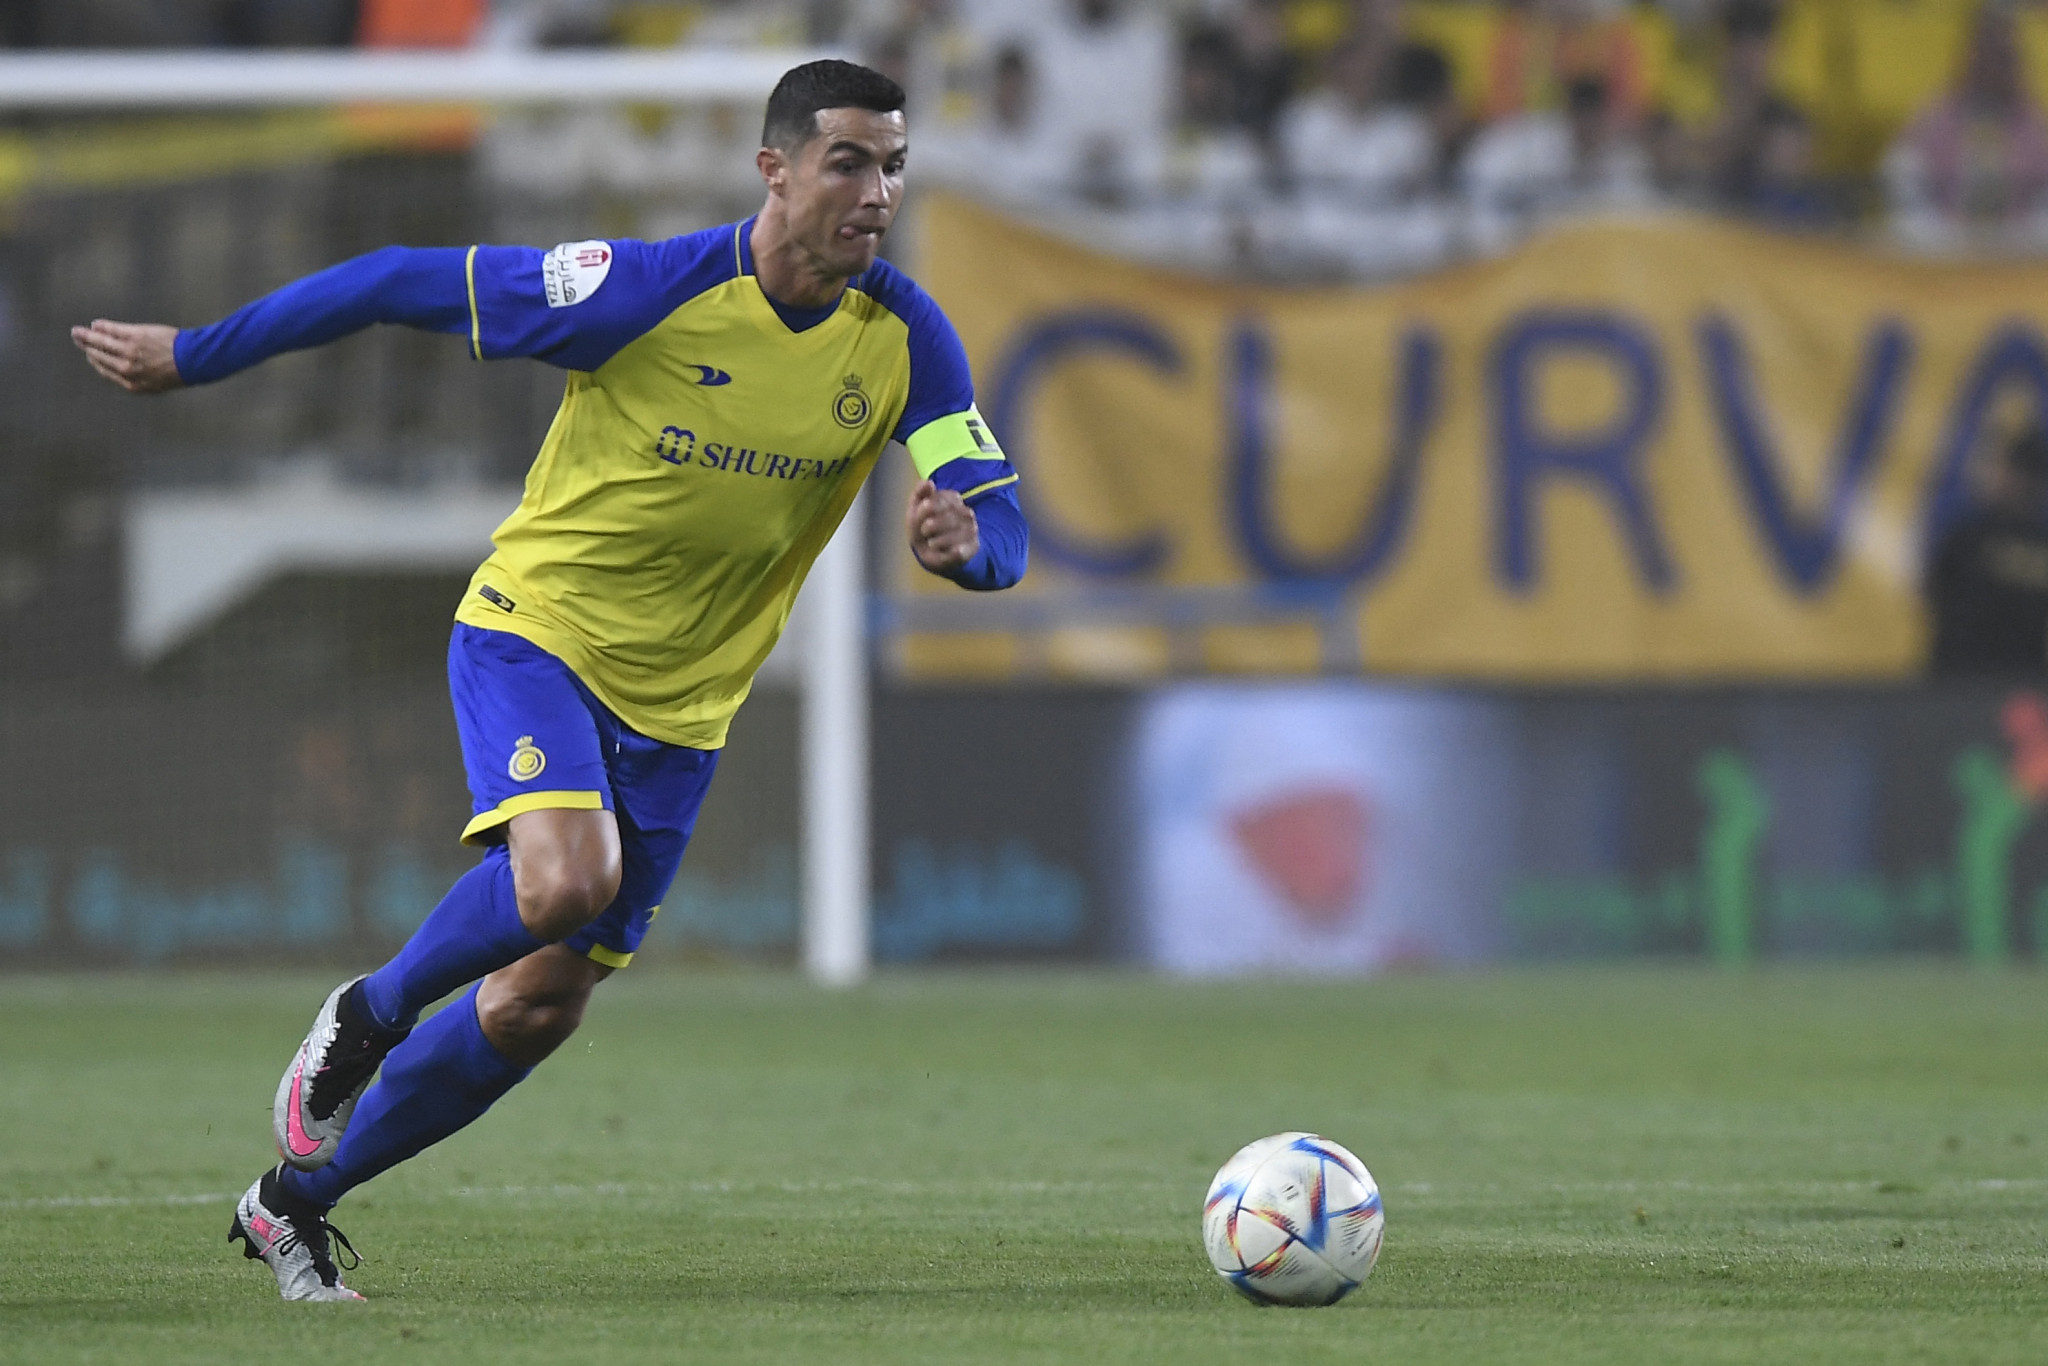 Cristiano Ronaldo is now playing in football's Saudi Pro League with the Al Nassr team ©Getty Images